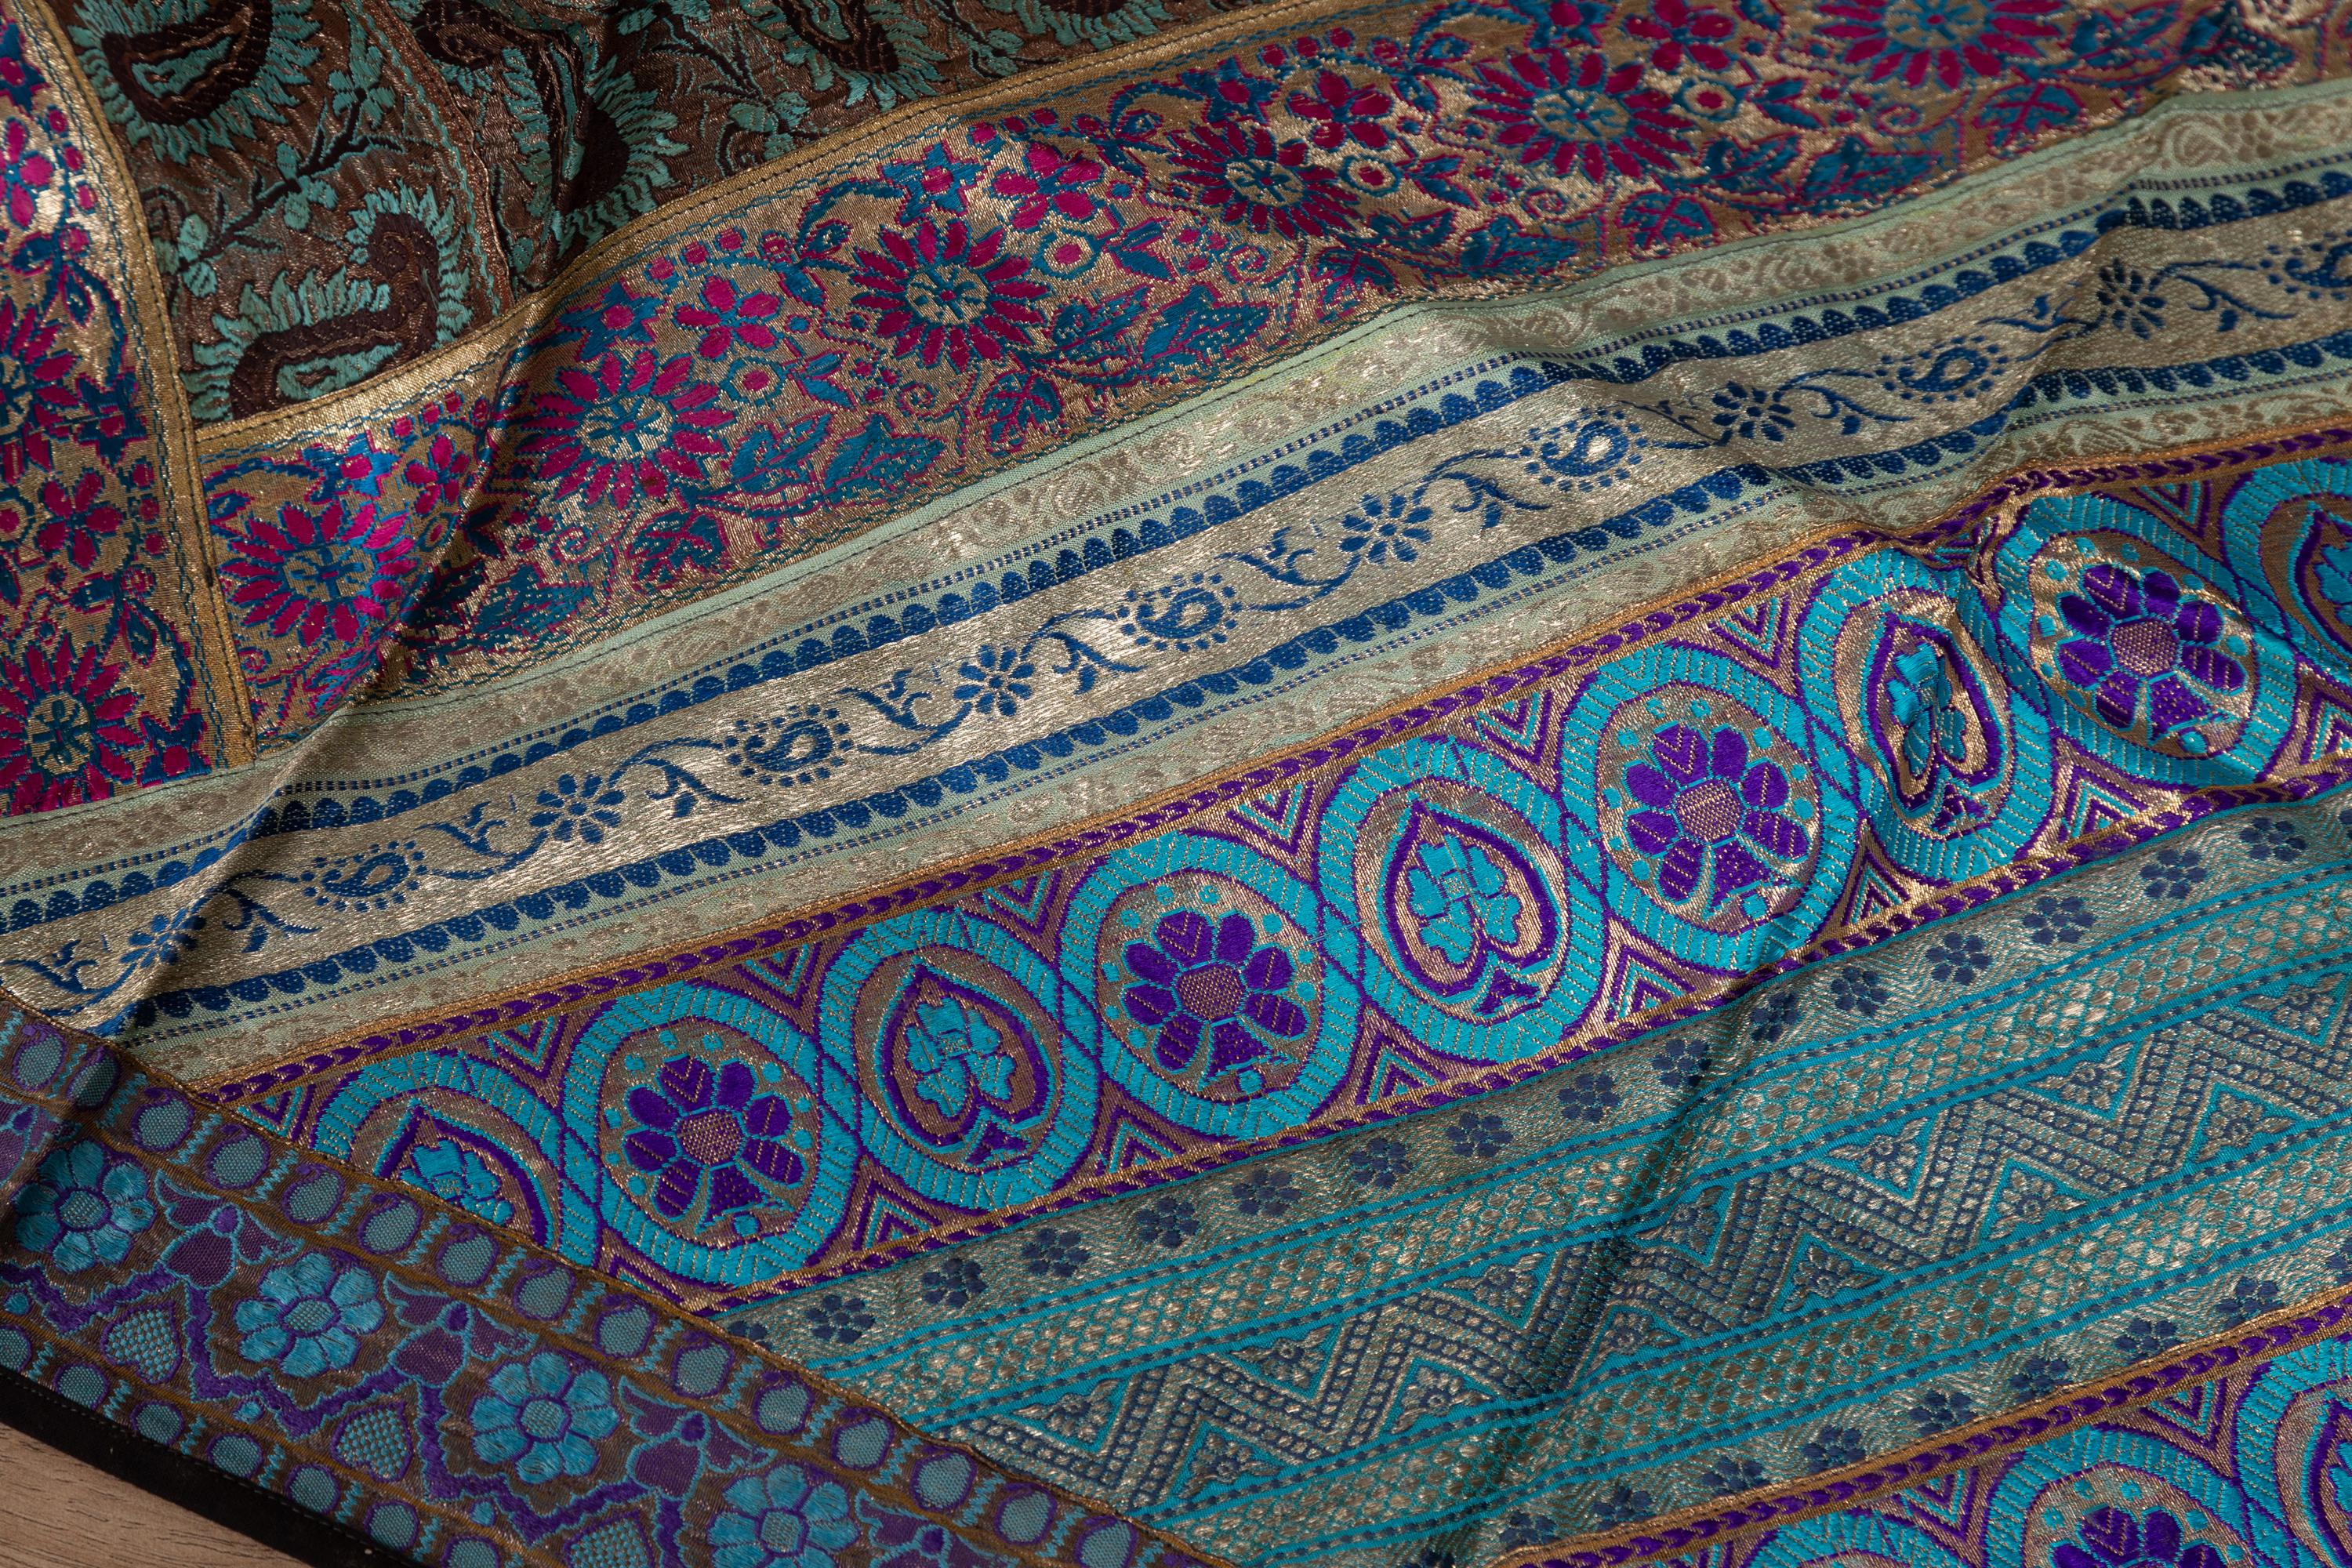 Vintage Indian Silk Embroidered Fabric with Turquoise, Violet and Gold Tones 6